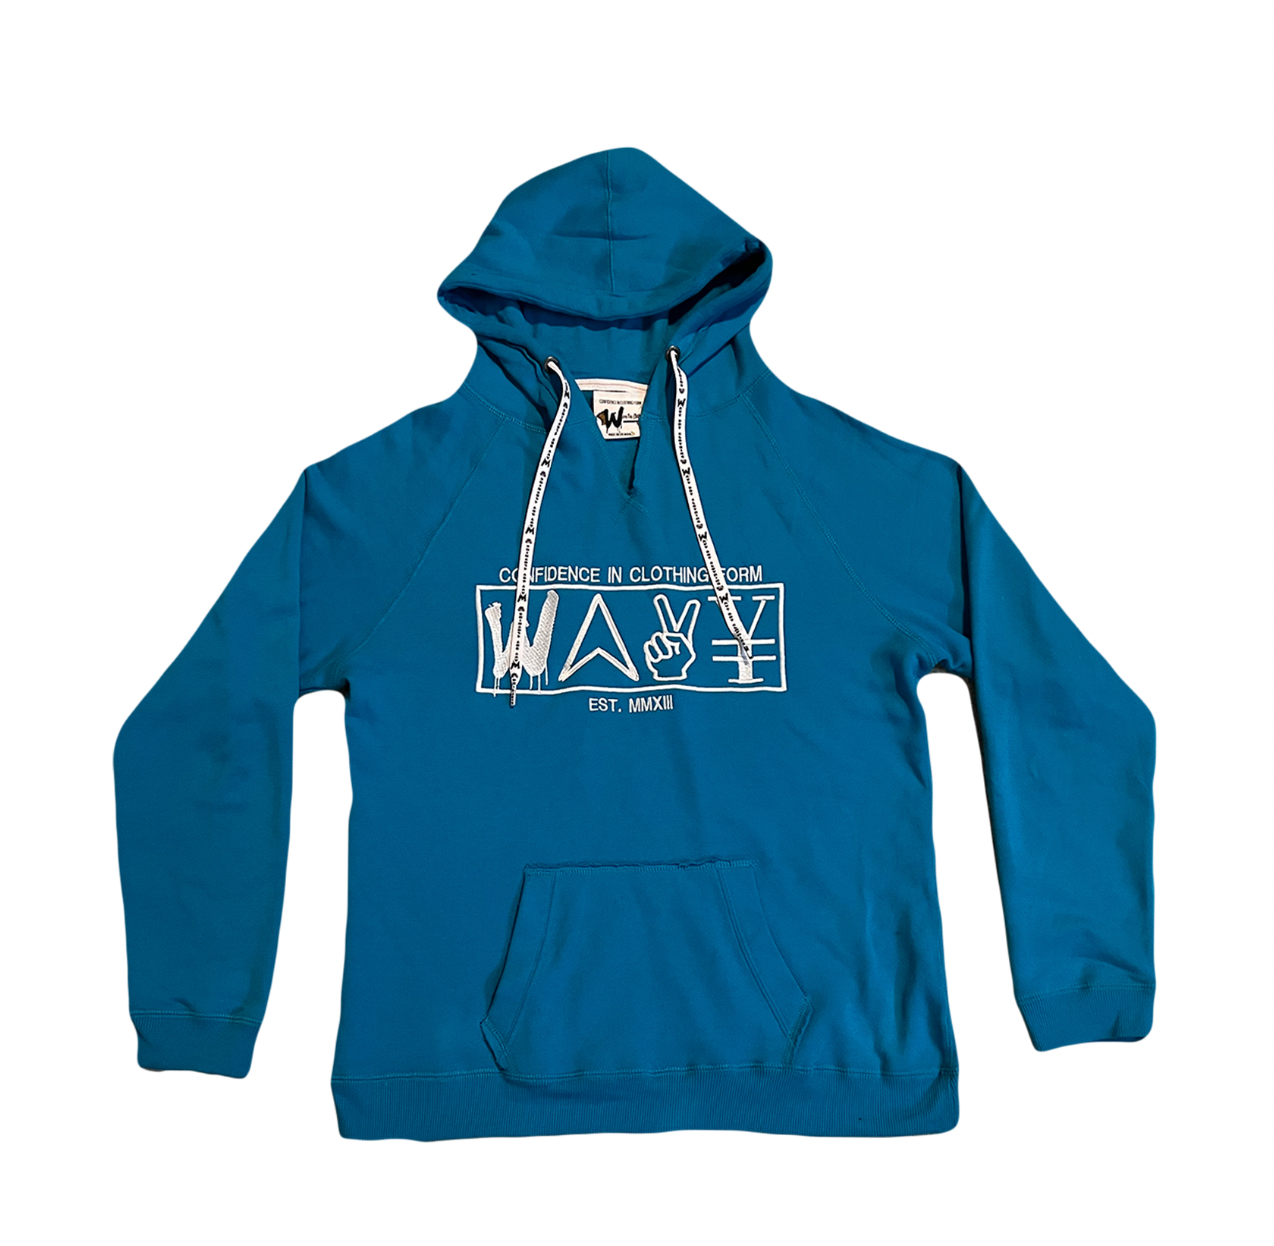 V Neck Hoodie , Embroidered, Wavy Boy Clothing, Unisex Hoodie, Streetwear Brand, Wavy Boy Clothing, Dope Hoodie, Different Hoodie, Luxury Hoodie, High Fashion Hoodie, New Wave, @wavyboyclothing , Streetwear, Women's clothing, Women's Hoodie, CONFIDENCE in CLOTHING form, spring fashion, 